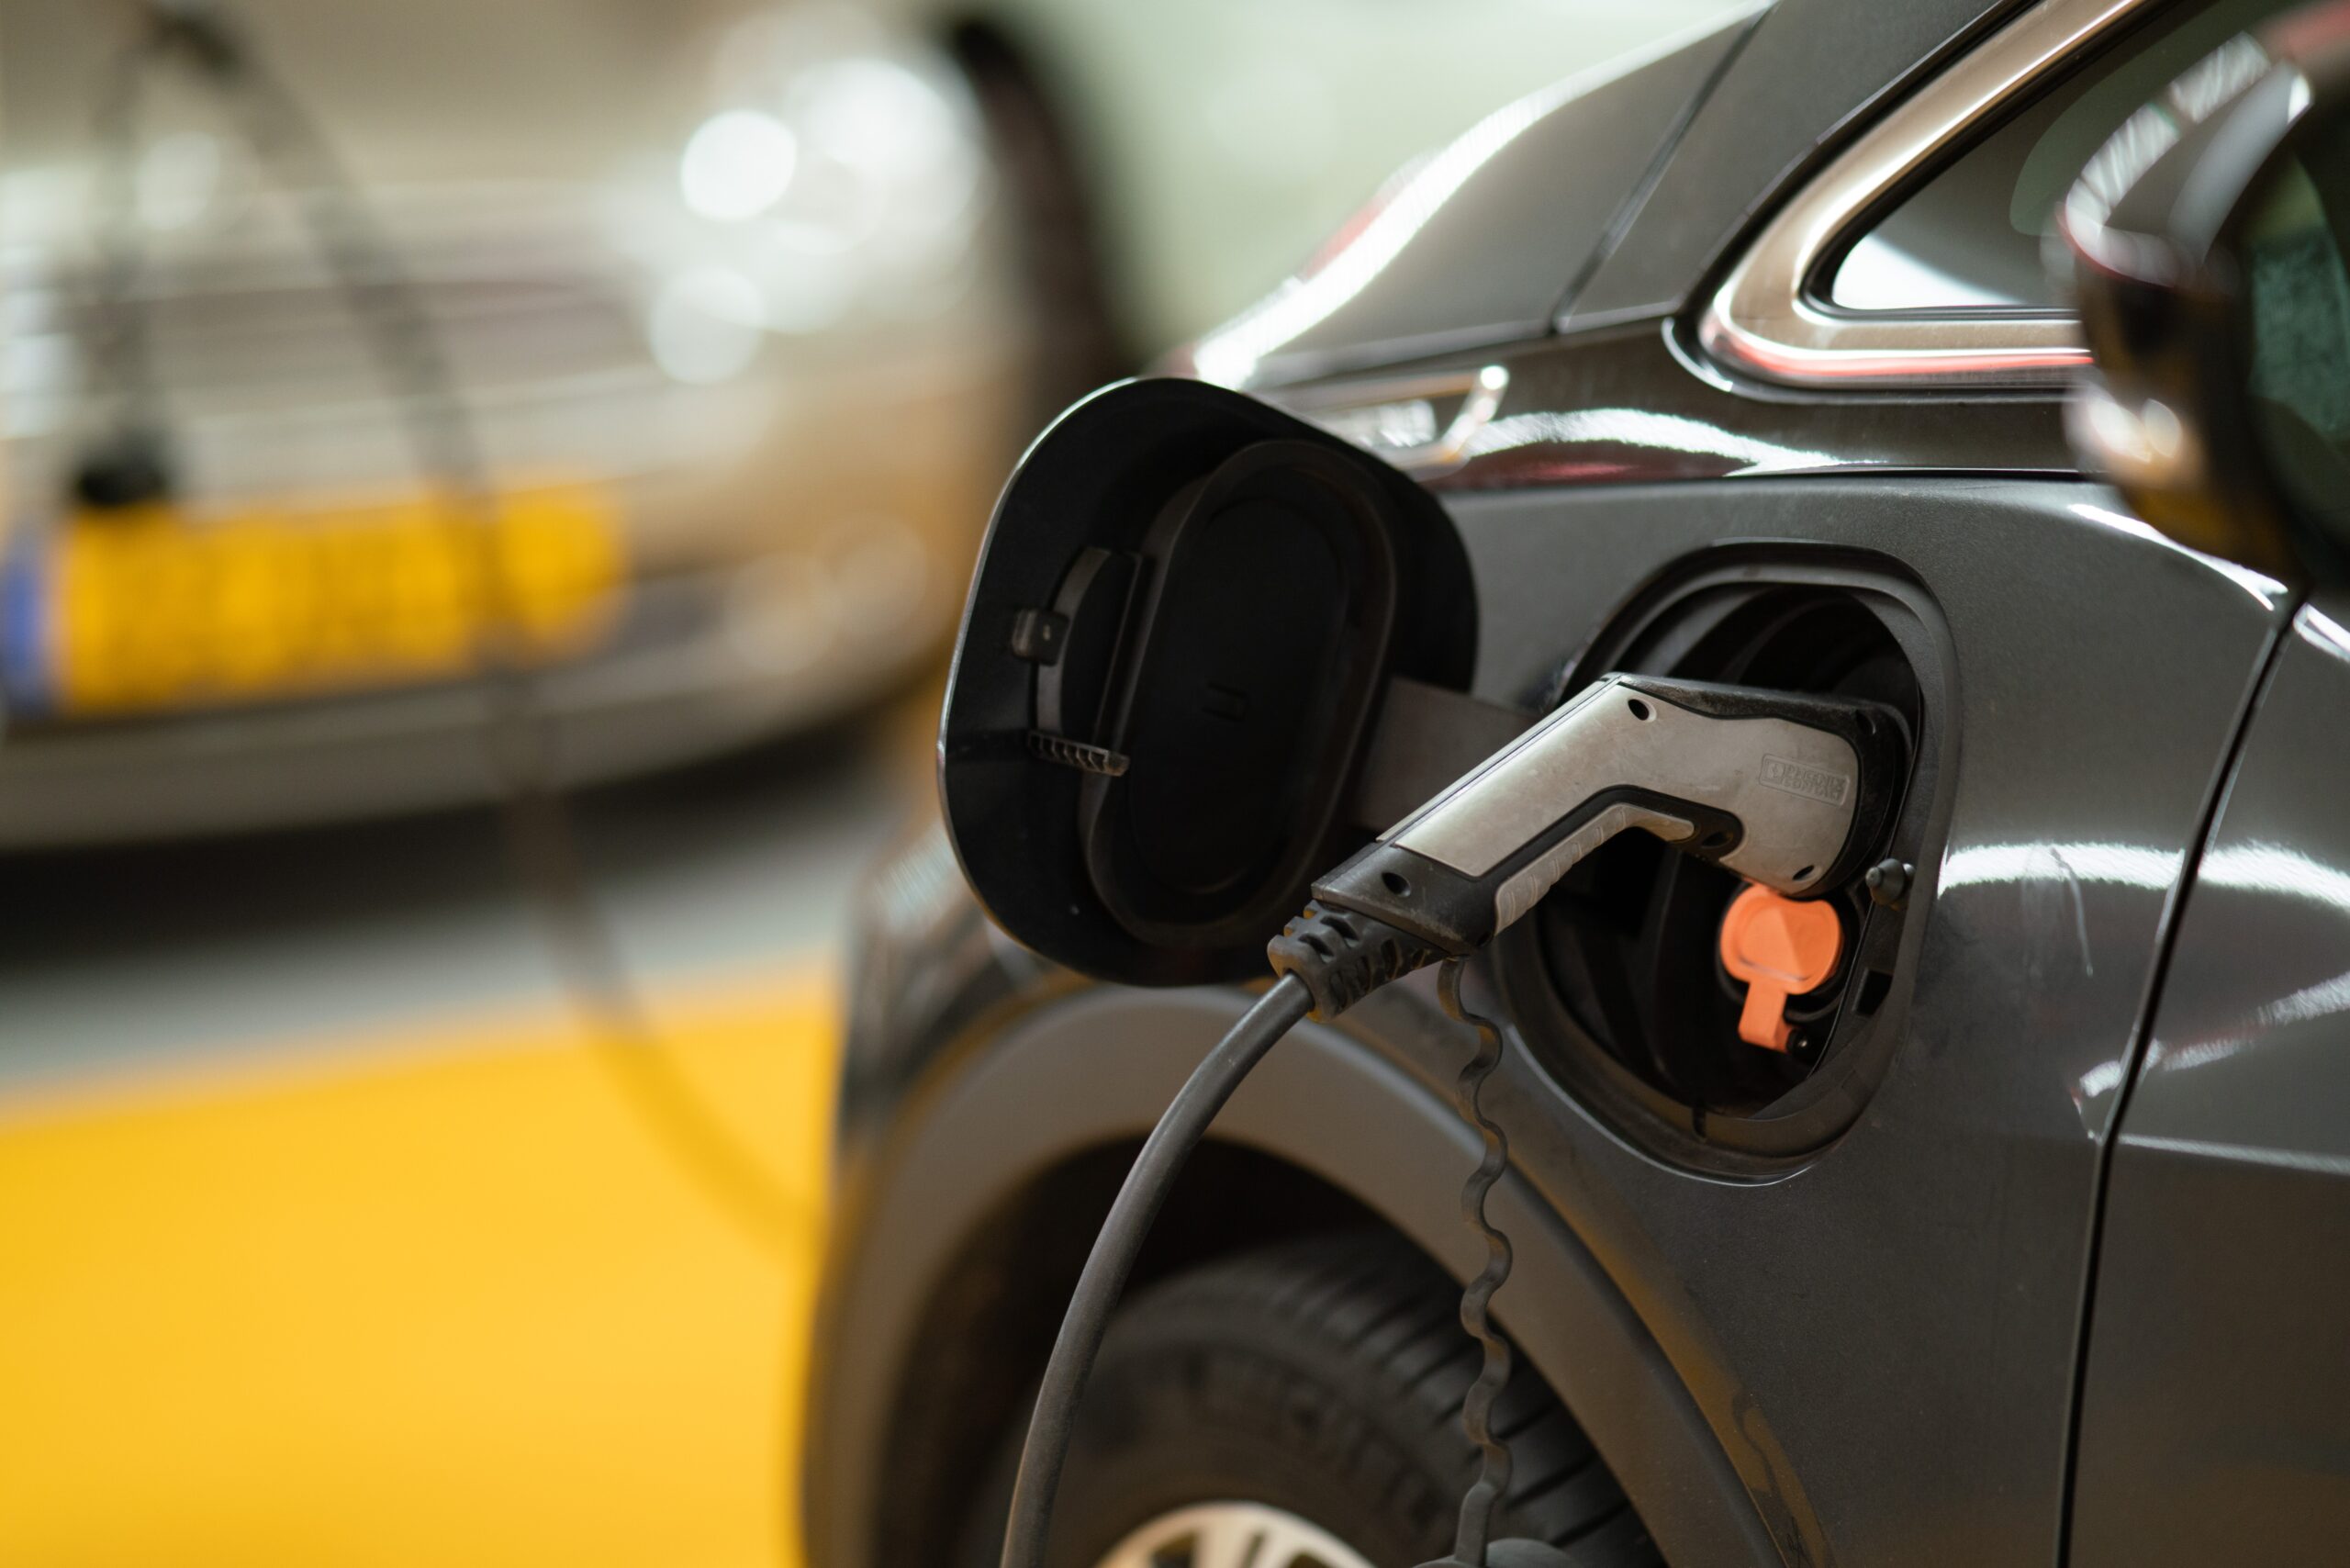 The Tax Benefits of Purchasing an Electric Vehicle